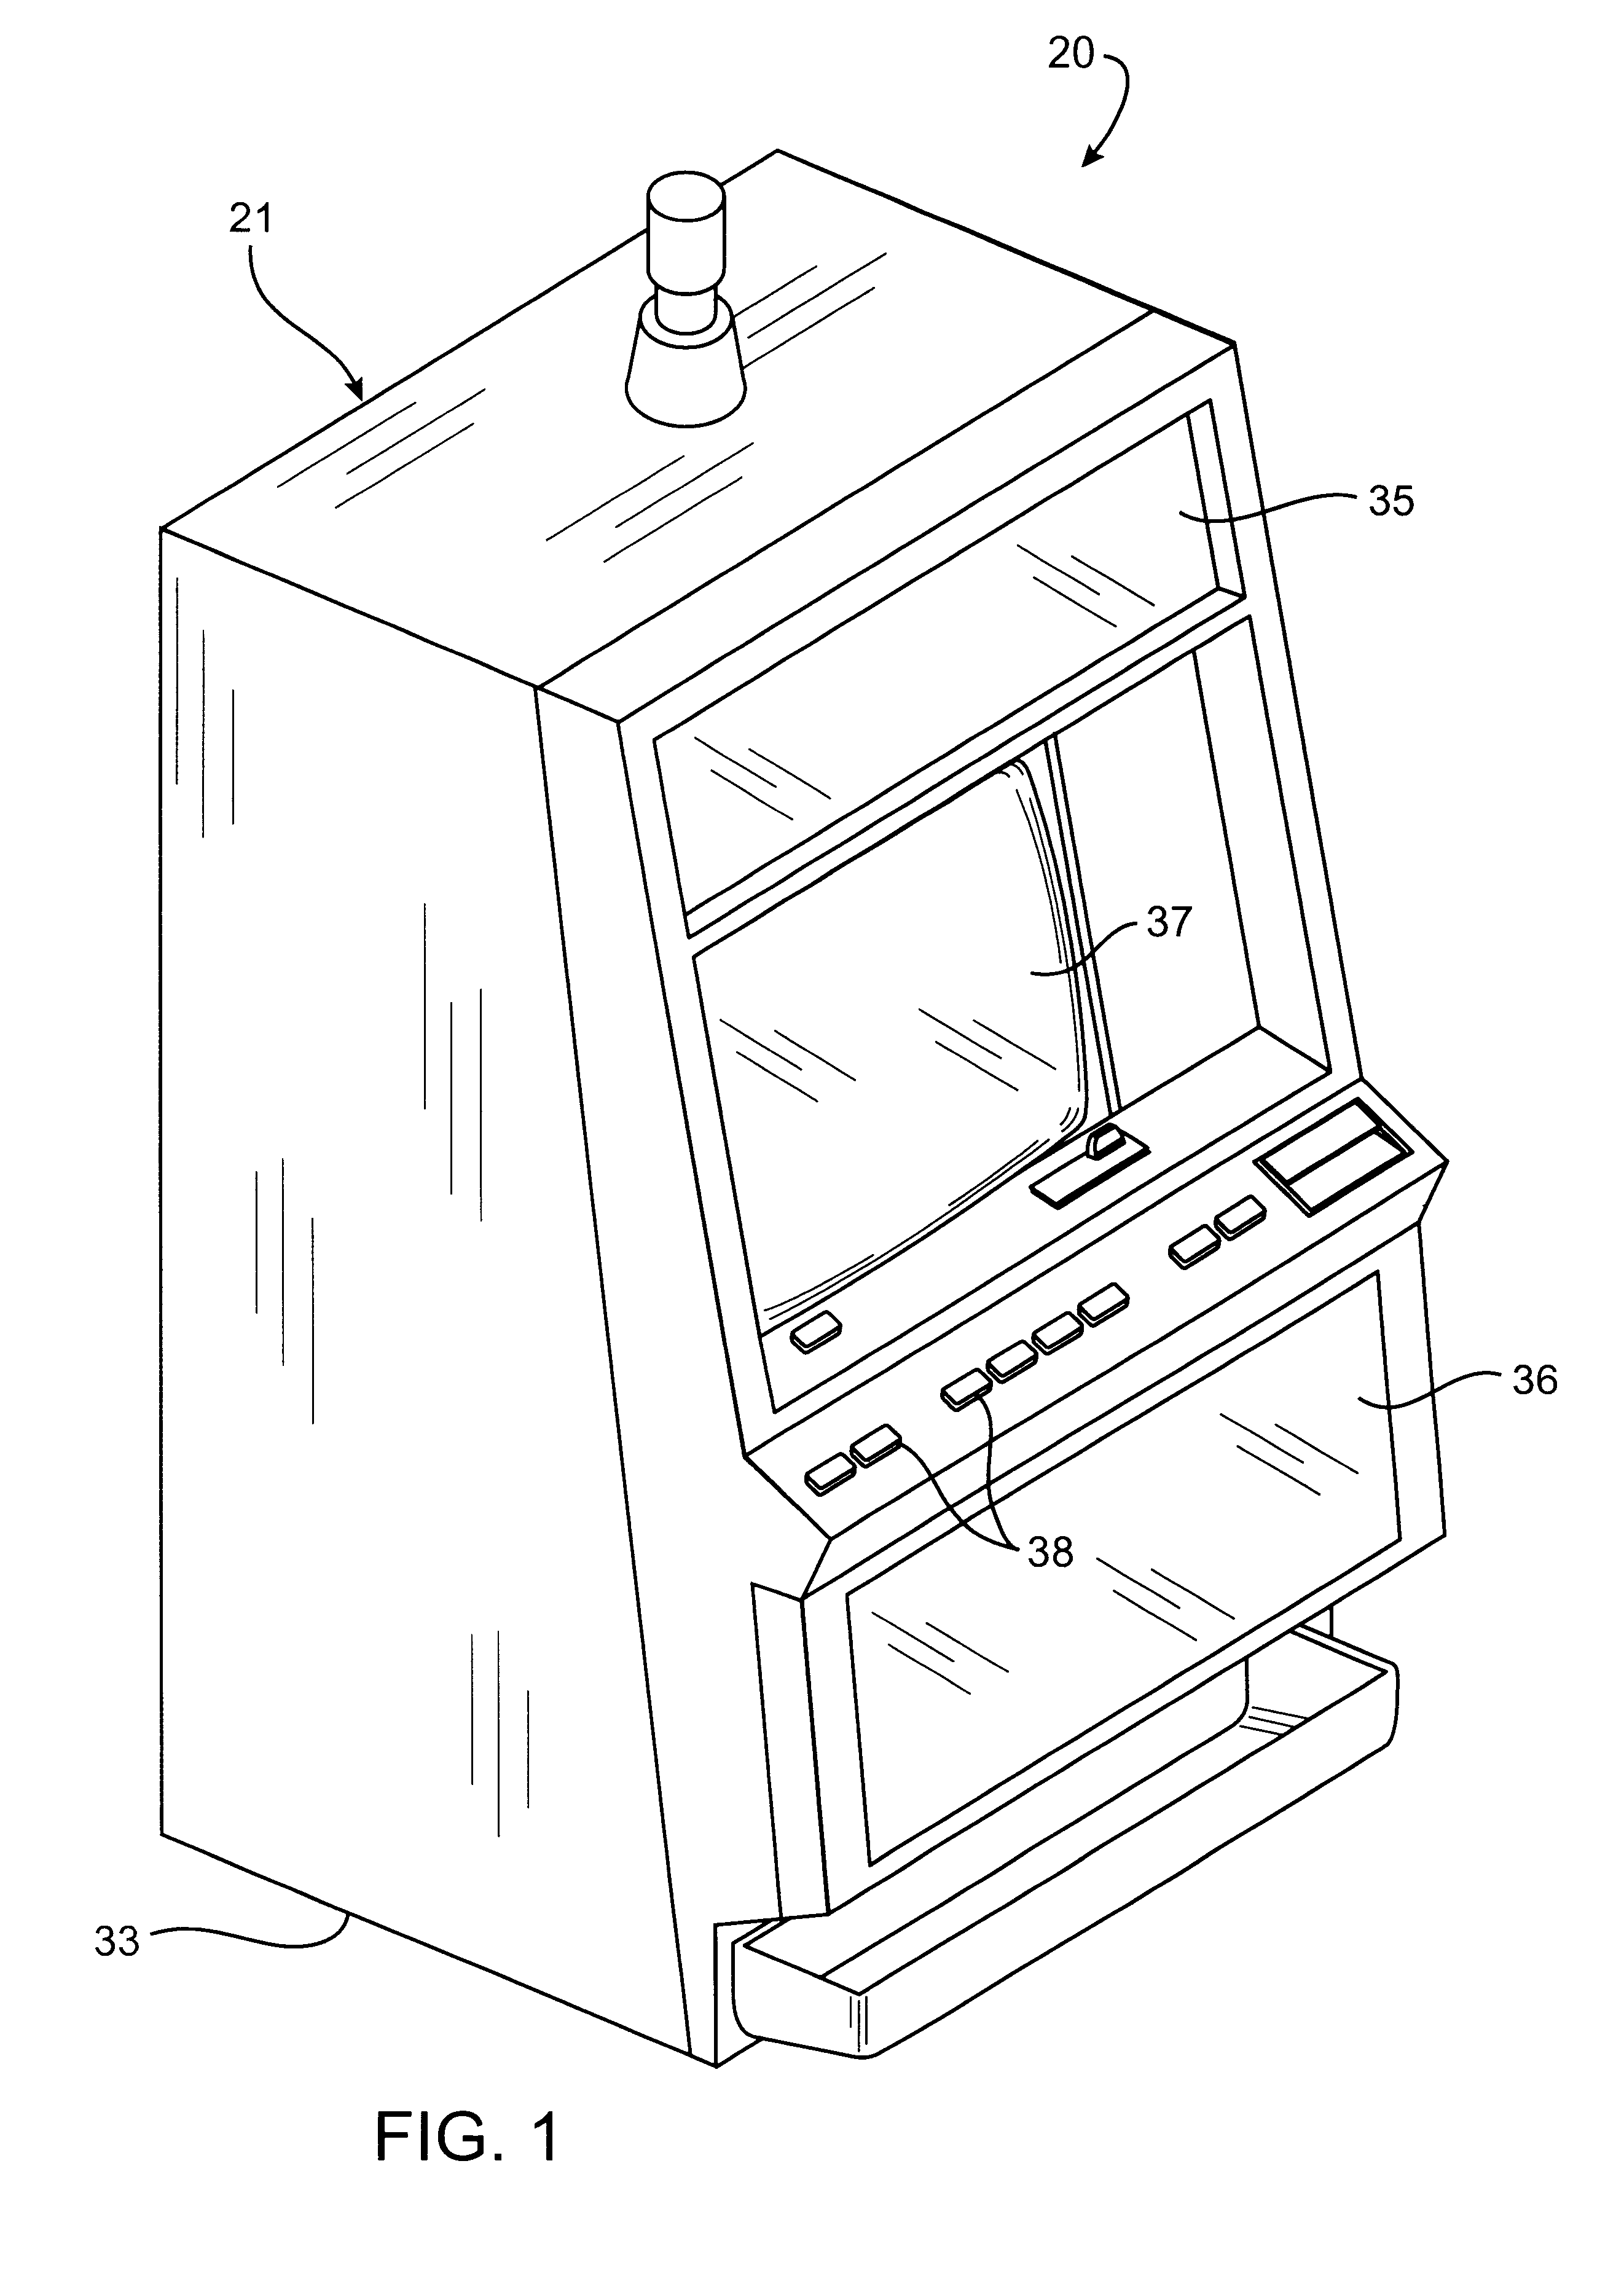 Electronic game licensing apparatus and method